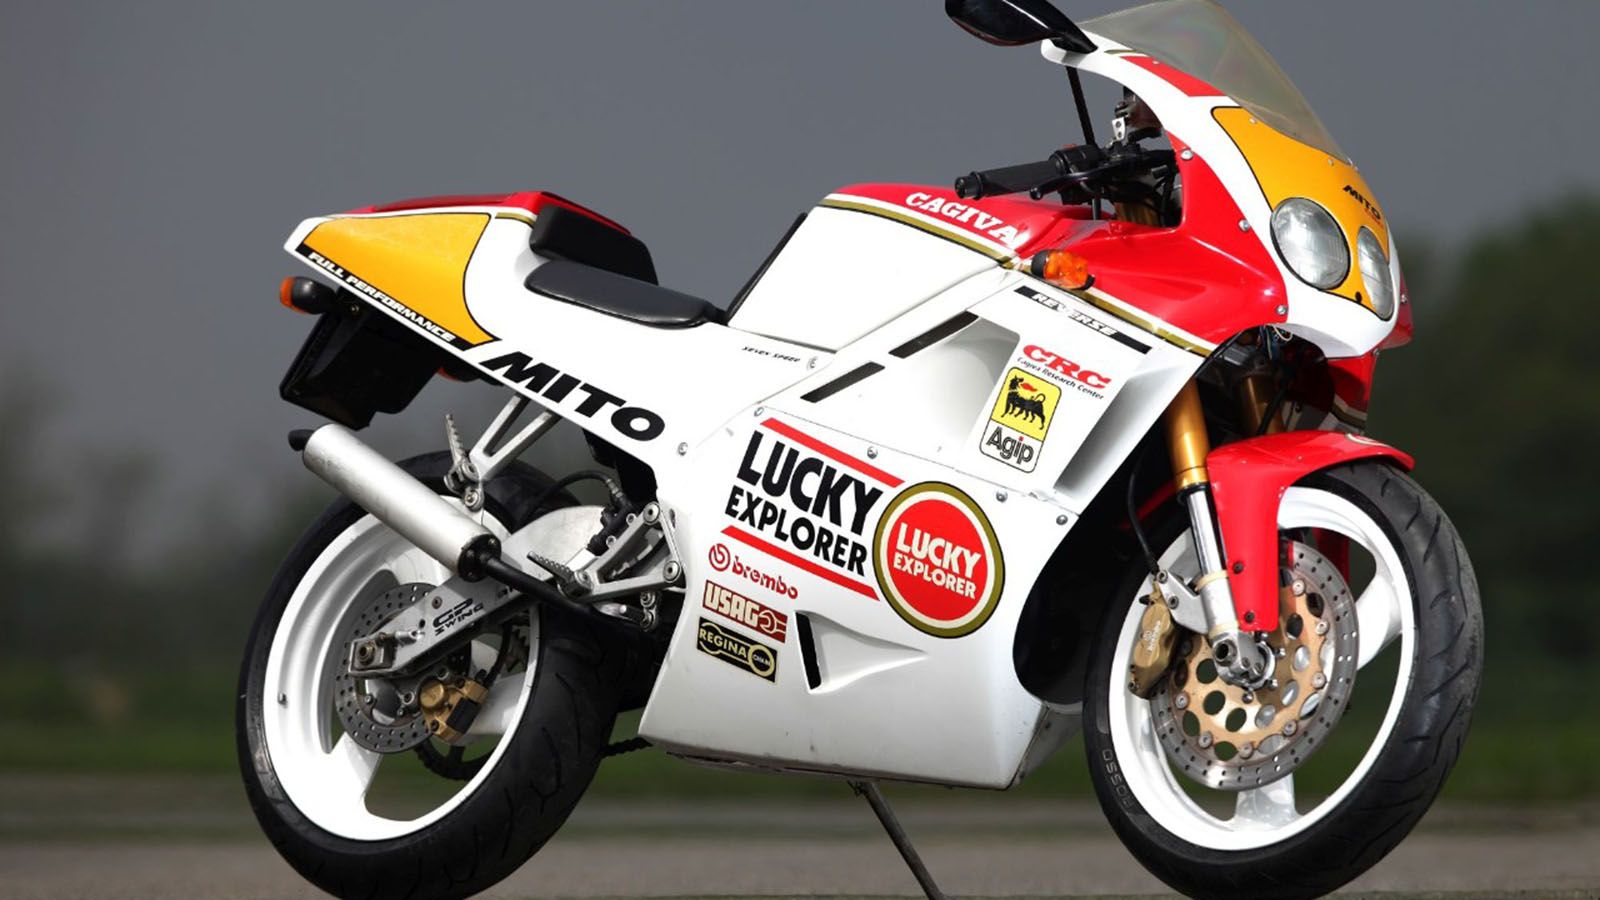 Racing cafè: cagiva mito "500" by made in metal motorcycles